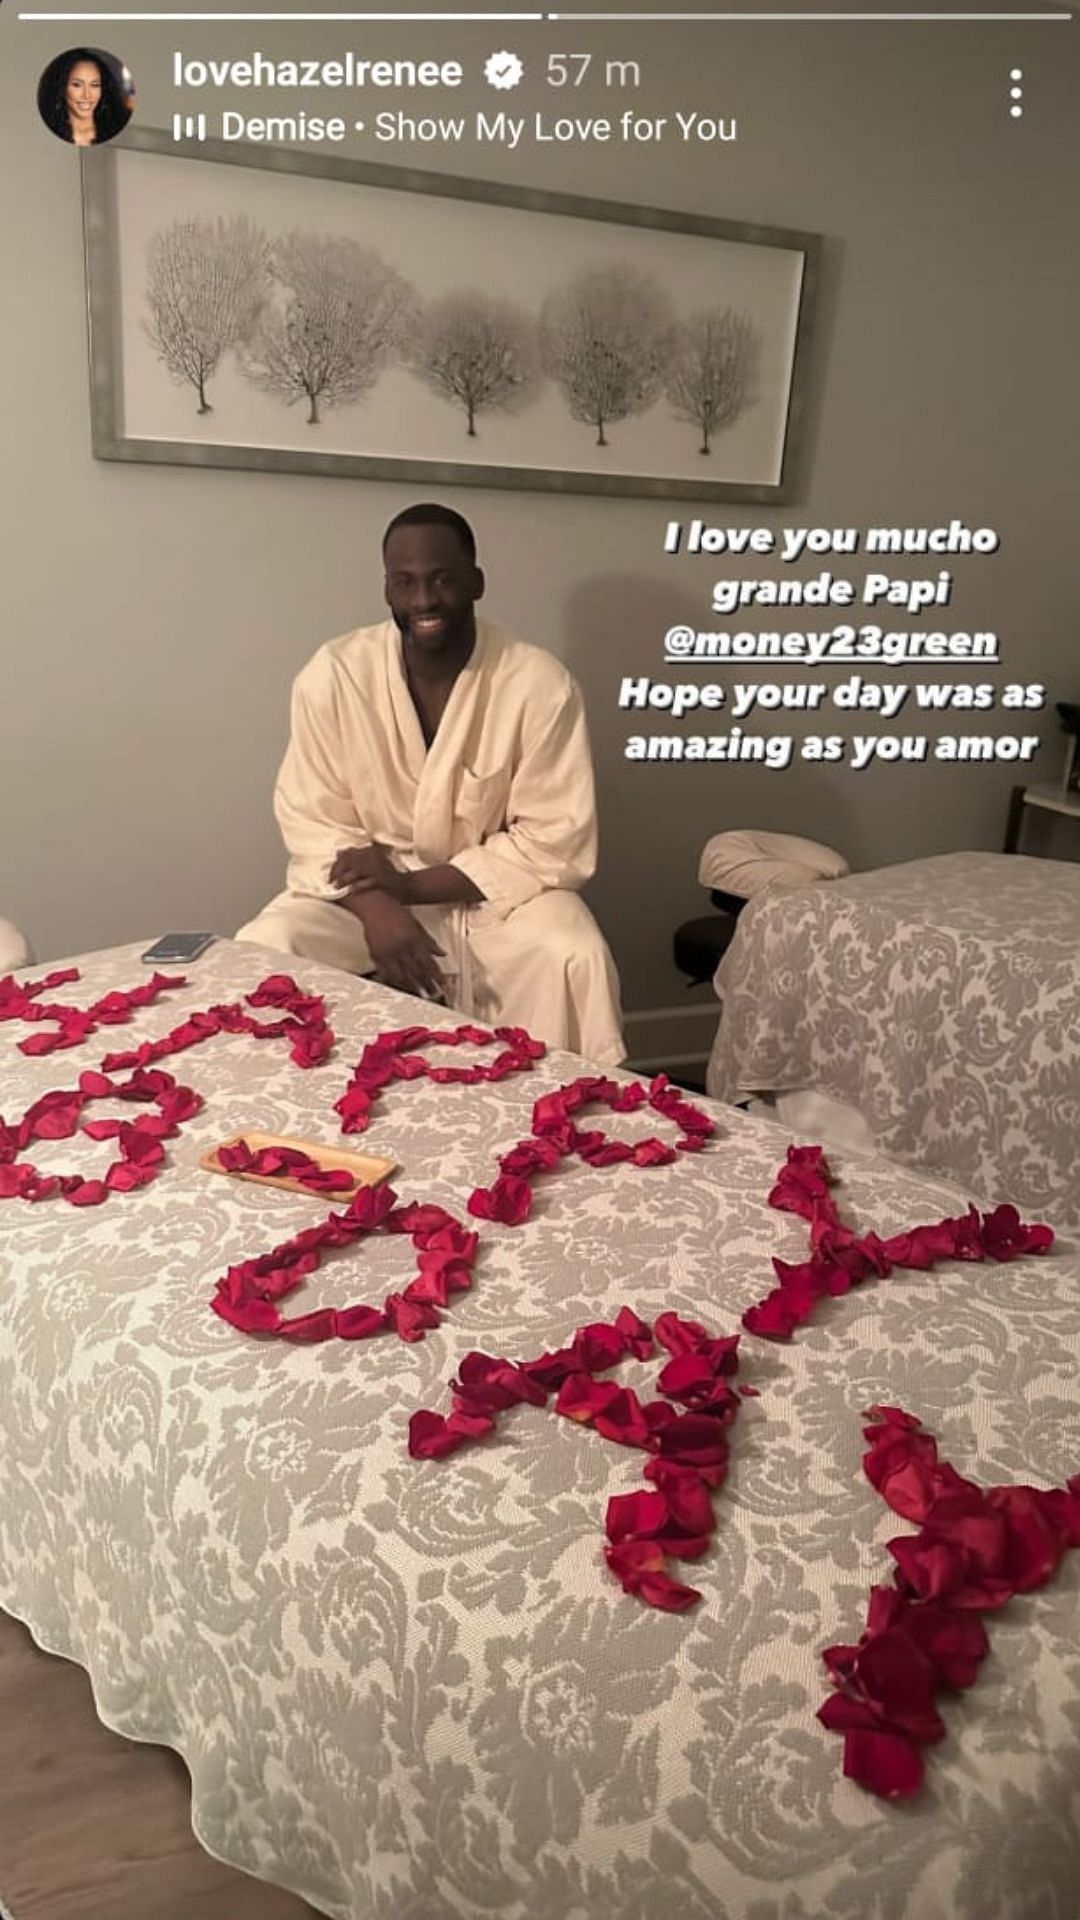 Hazel Renee&#039;s Instagram story featuring Draymond Green and rose petals spelling &#039;Happy B-Day&#039;